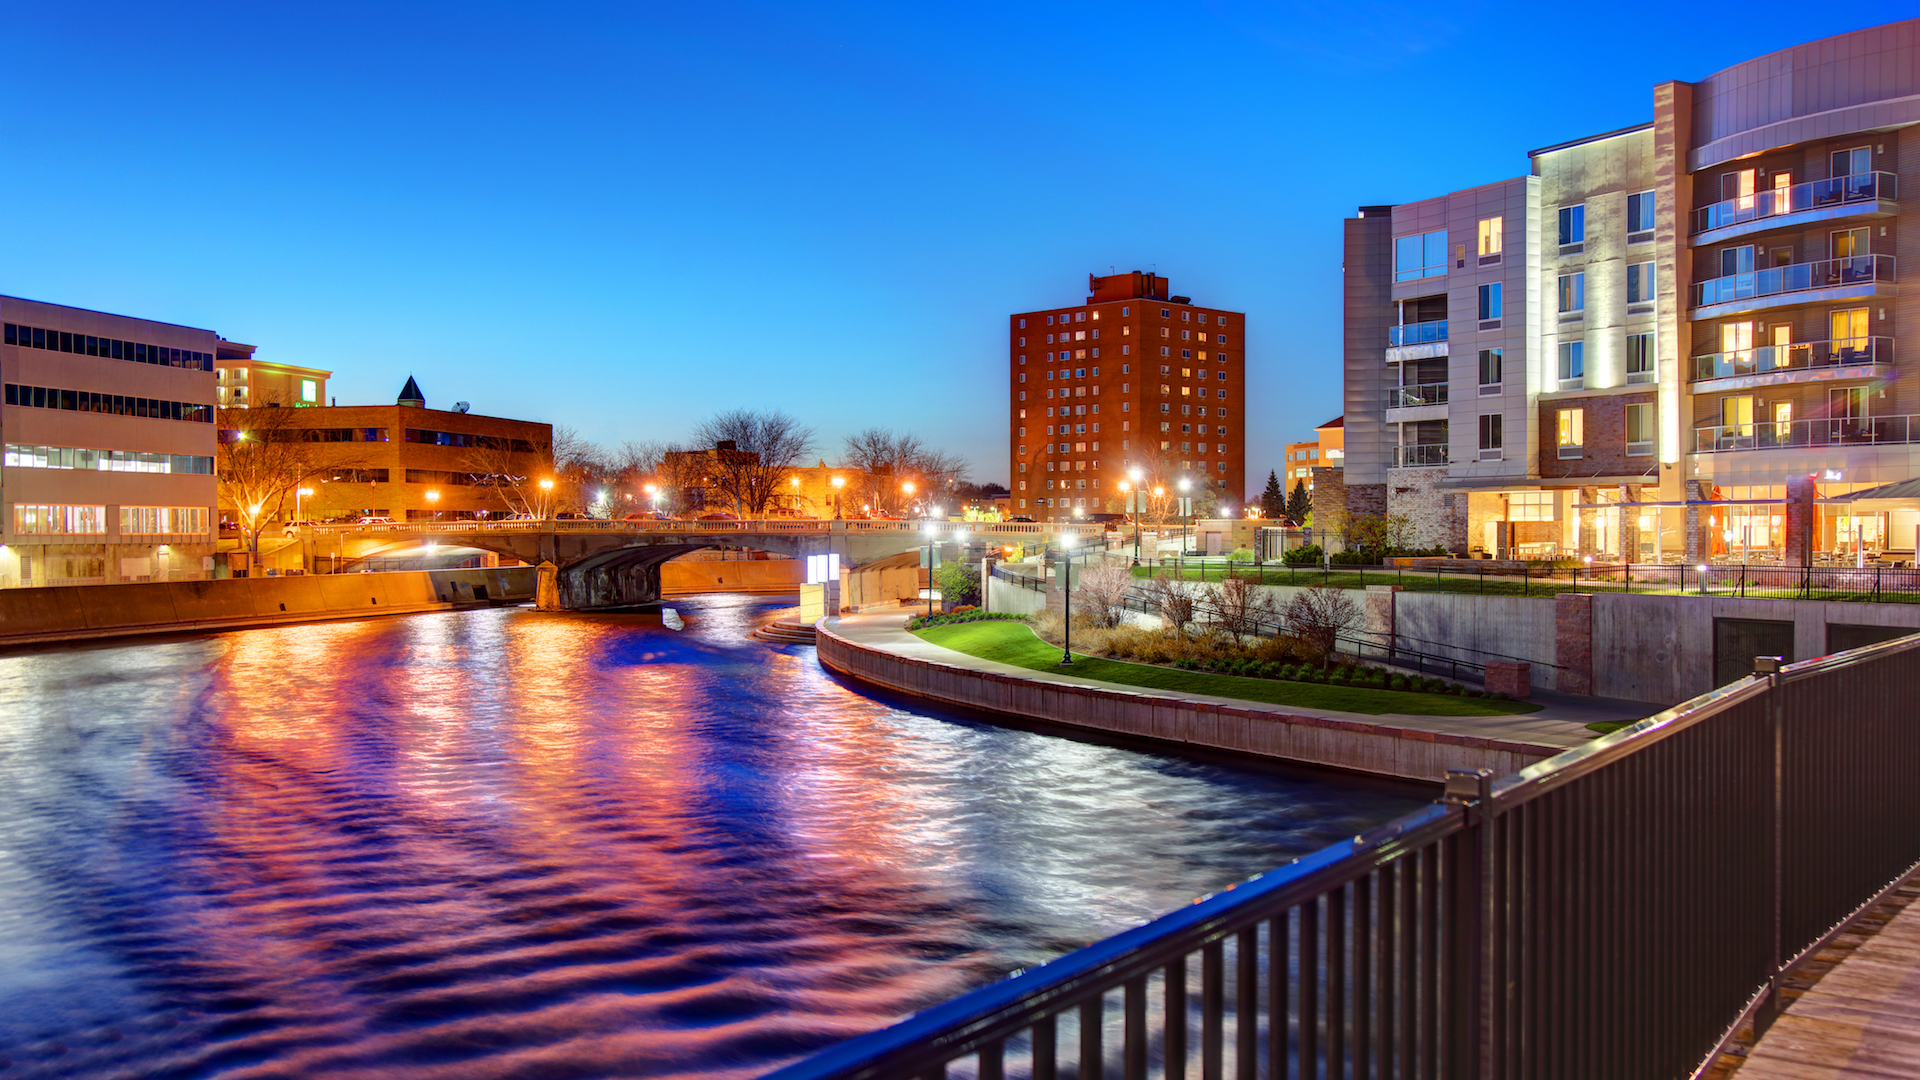 <ul> <li><strong>Median home value:</strong> $229,817</li> <li><strong>Median household income:</strong> $59,912</li> </ul> <p>Sioux Falls, South Dakota, population 177,117, is South Dakota’s largest city. It has “a bustling economy, lively downtown, extensive park system and classic Midwest nice community, according to the city website.</p> <p>It costs 9 percent less than the rest of the U.S. to live in Sioux Falls — and it has great amenities, but it may be a bit harder to come by employment. So consider having a job offer in hand before you move.</p>